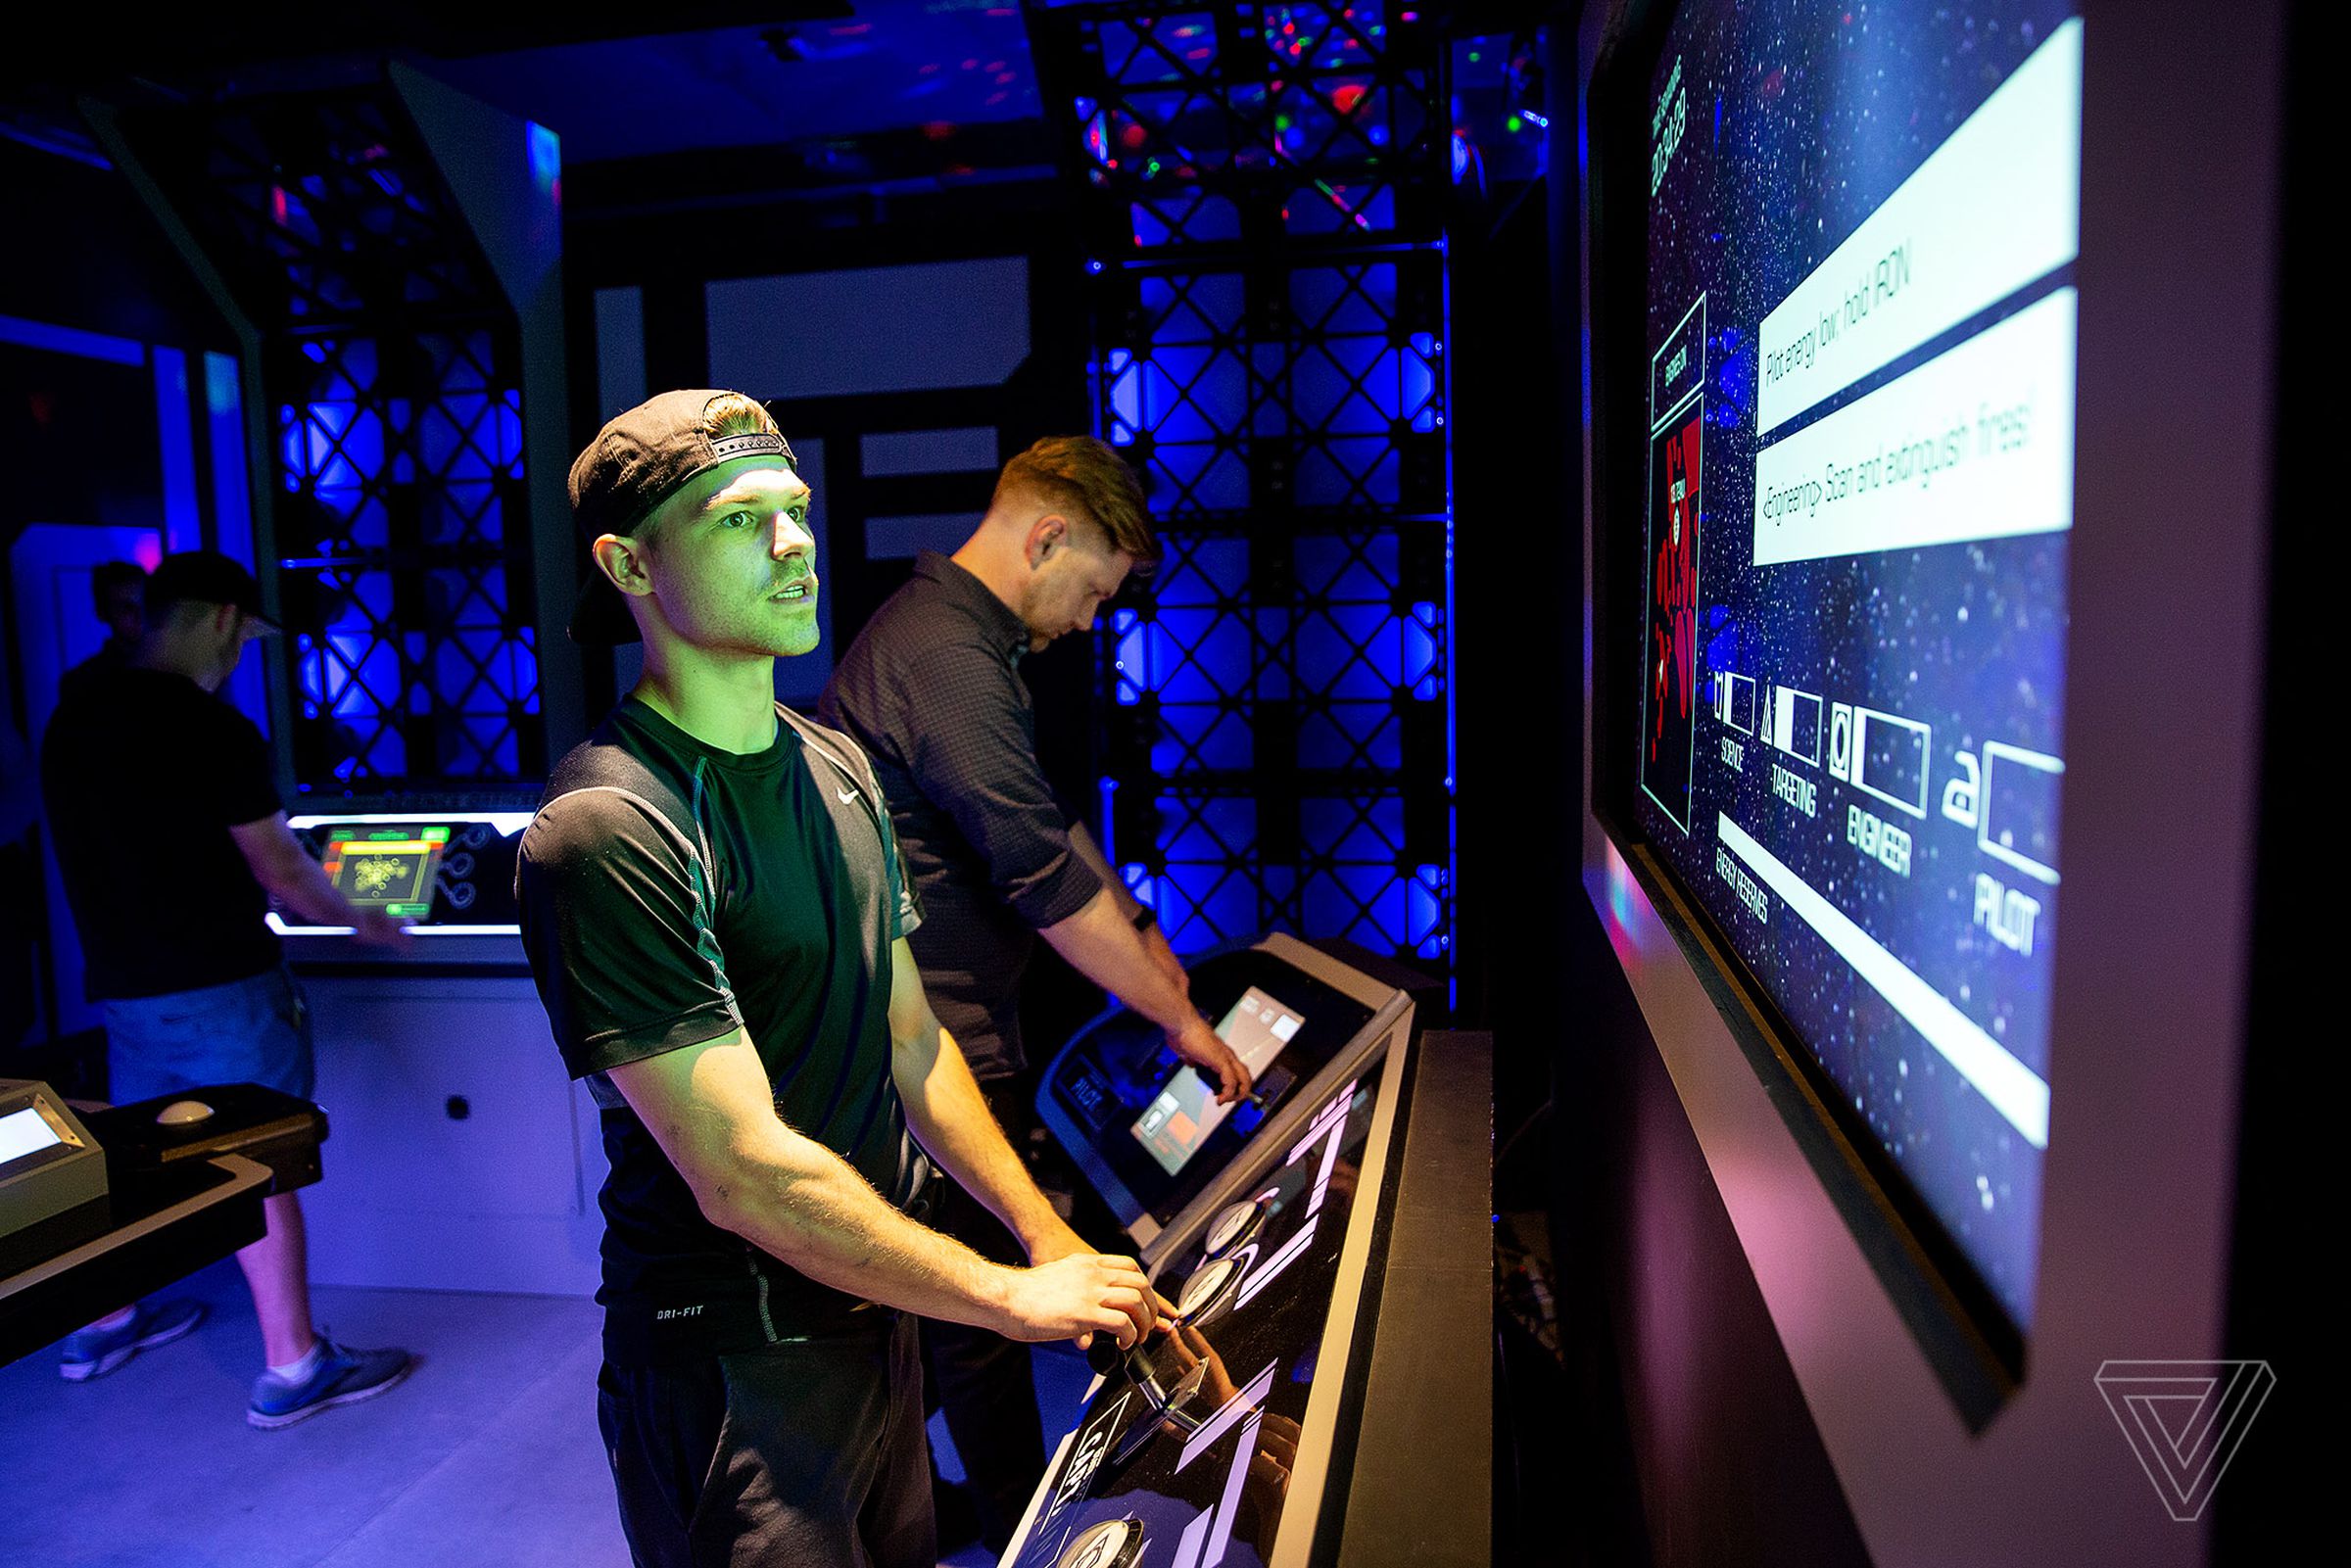 A group of players in a round of Space Squad in Space.